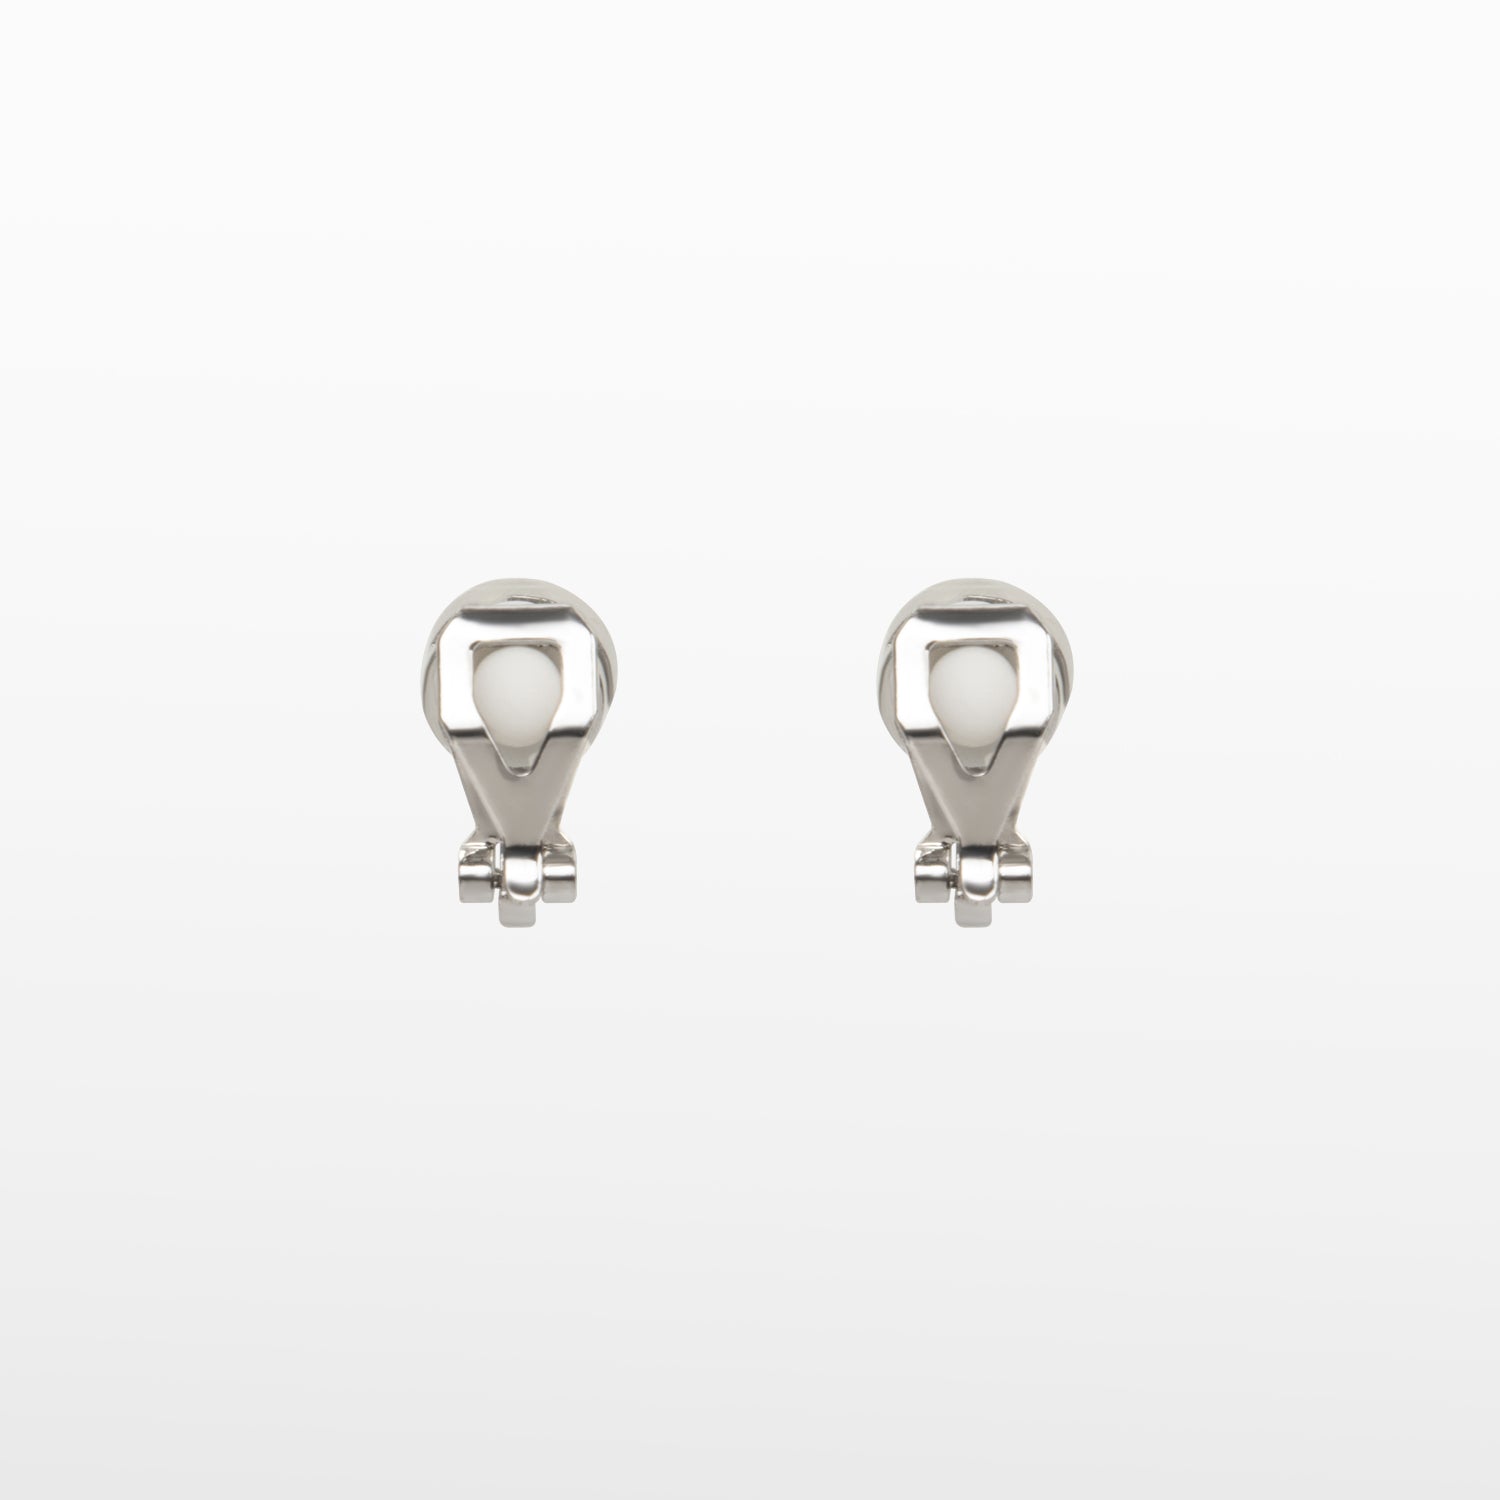 Image of the Cushion Stud Clip-On Earrings in Silver boast a padded closure type and are suited for all types of ears. With secure hold and comfortable wear duration of up to 8-12 hours, this one pair of earrings is crafted from gold plated copper and finished with Cubic Zirconia.